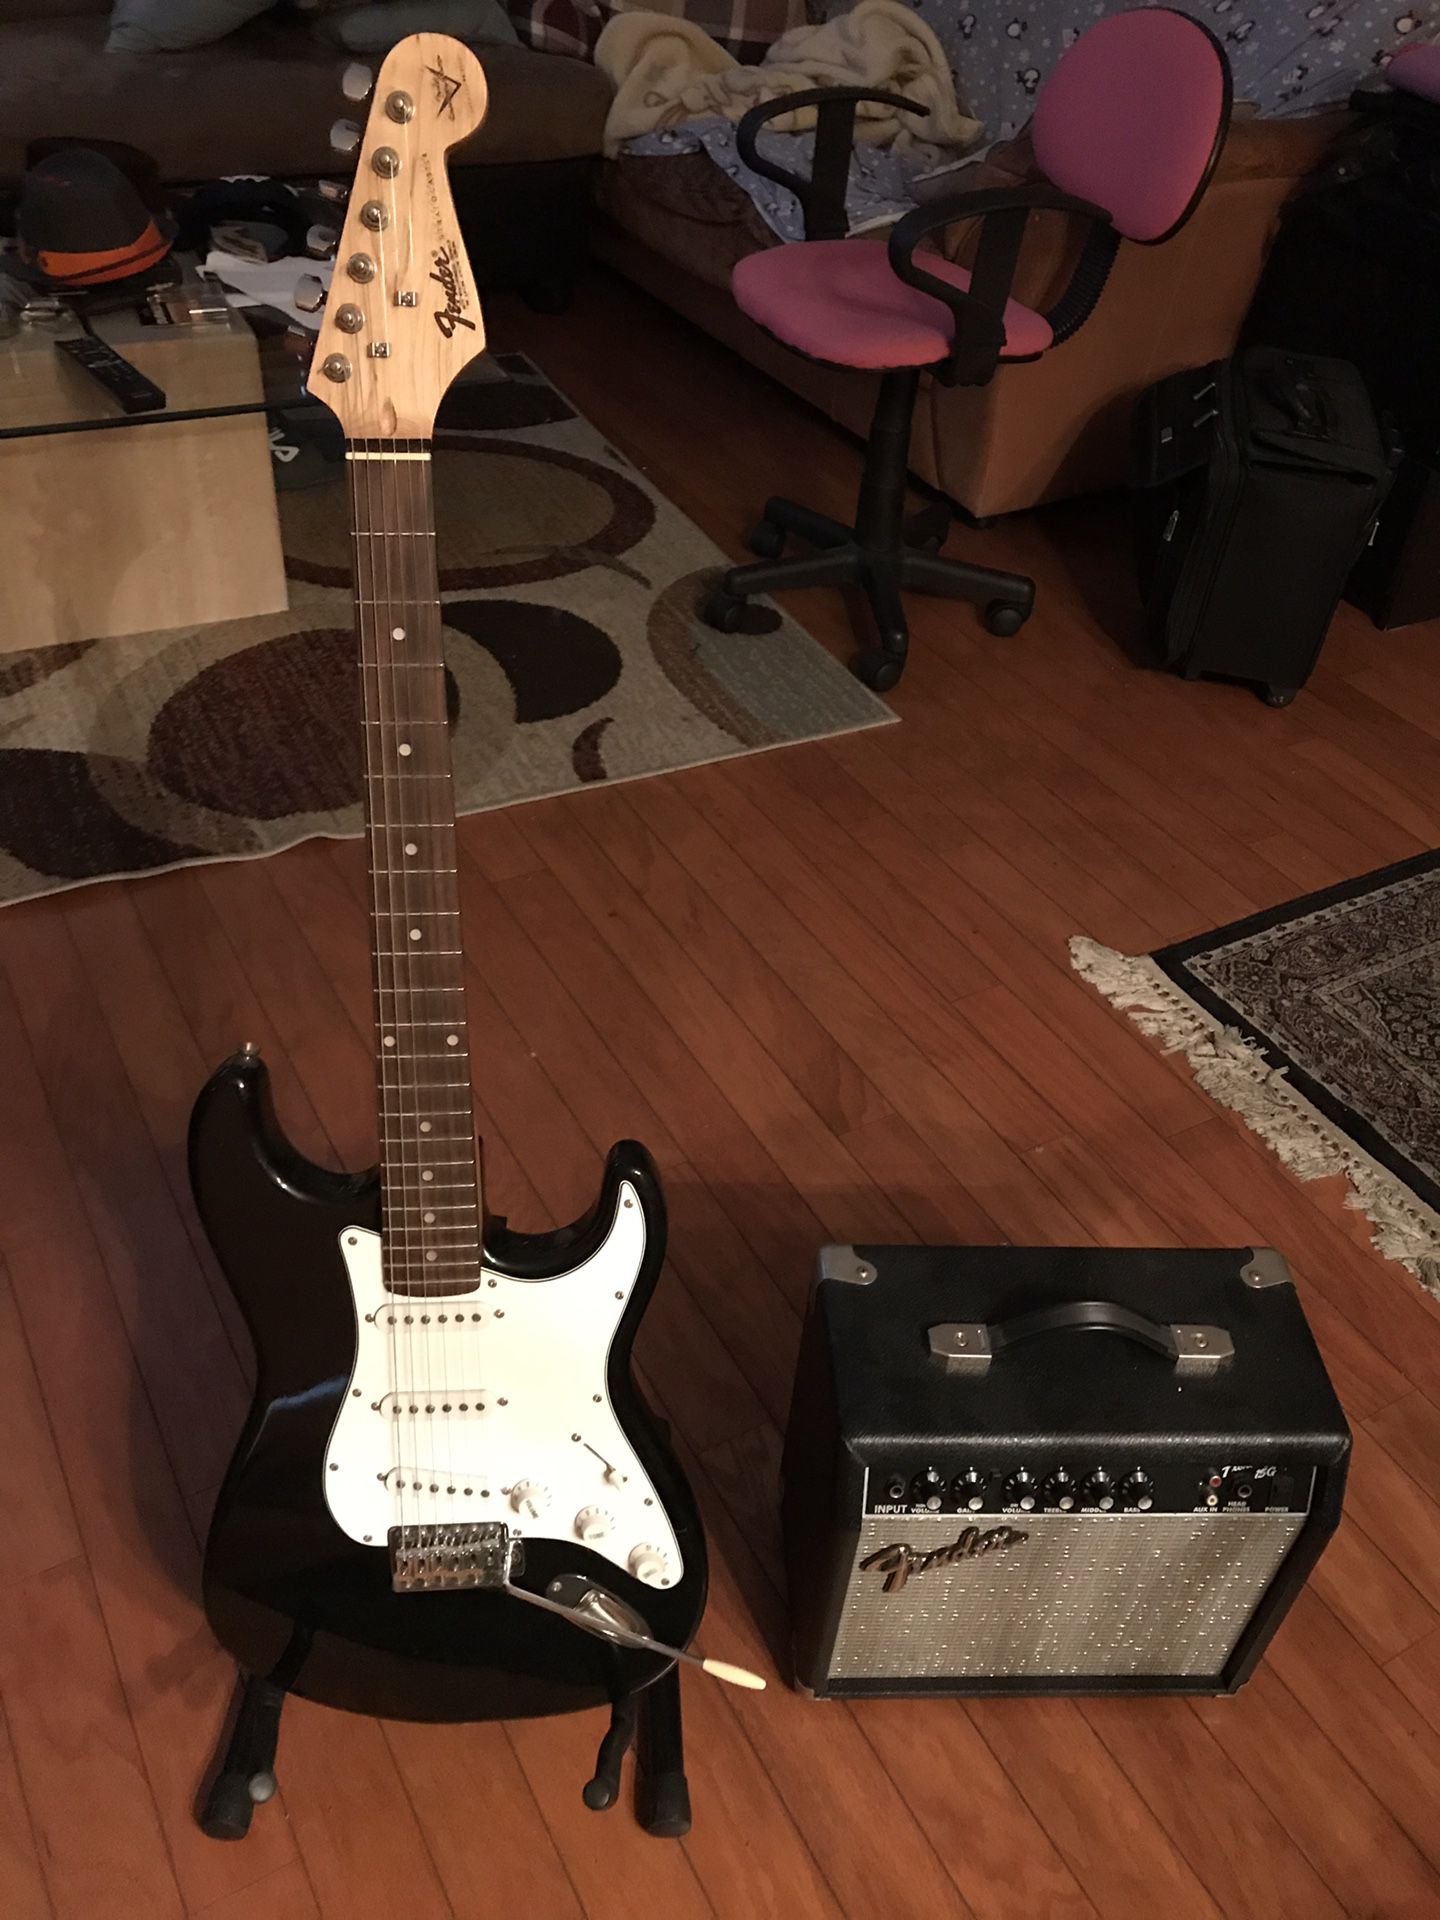 Like new Fender project guitar completed. Comes with Fender amp and gig bag.